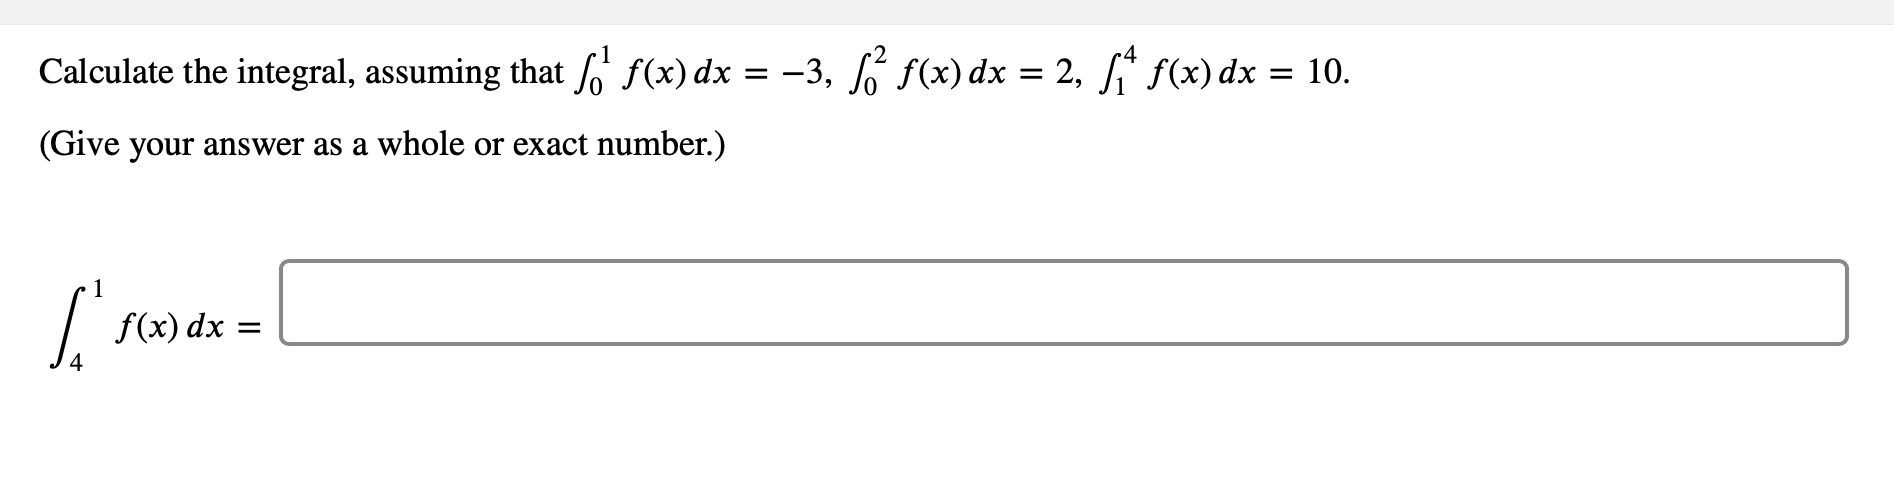 Calculate the integral, assuming that ' f(x) dx
= -3, f f(x) dx = 2, f(x) dx = 10.
(Give your answer as a whole or exact number.)
f(x) dx =
